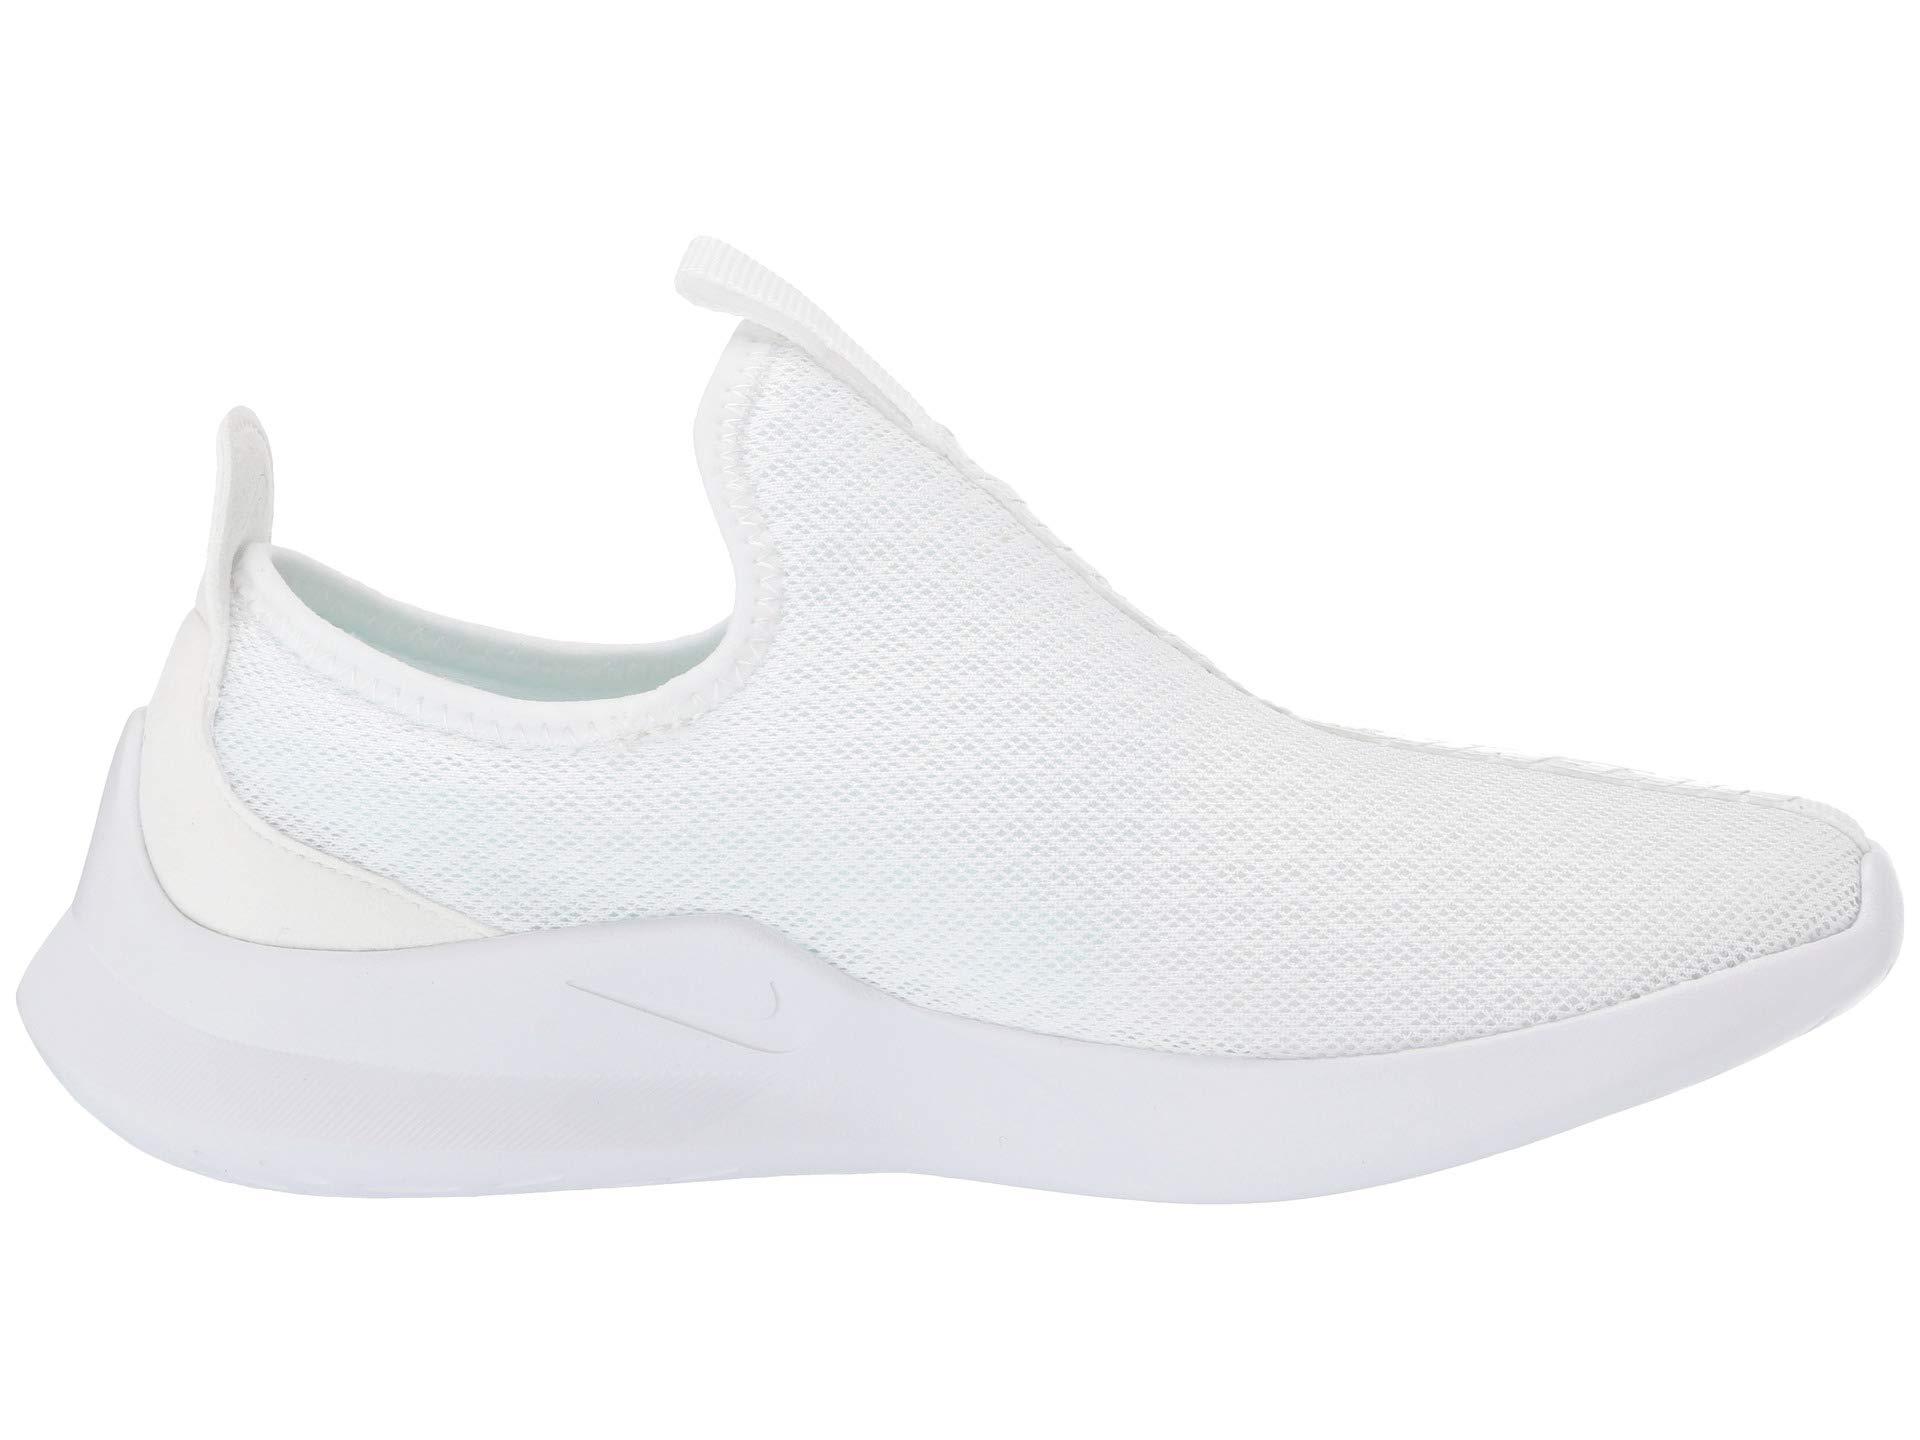 Sabueso patata Cosquillas Slip On White Nikes Hotsell, SAVE 34% - aveclumiere.com